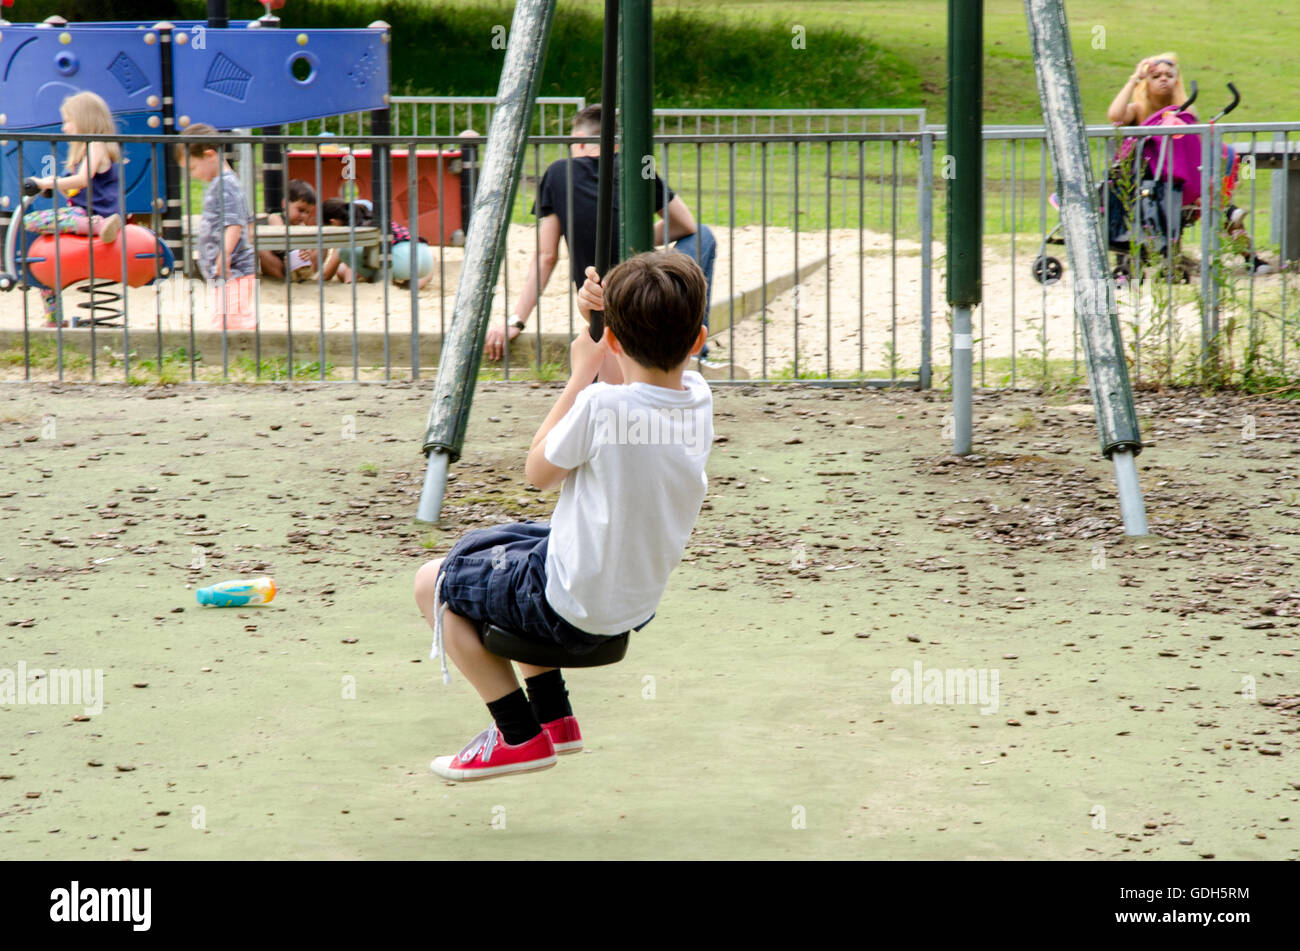 A young boy rides down a zip wire in a children's playground in Prospect Park, Reading, Stock Photo